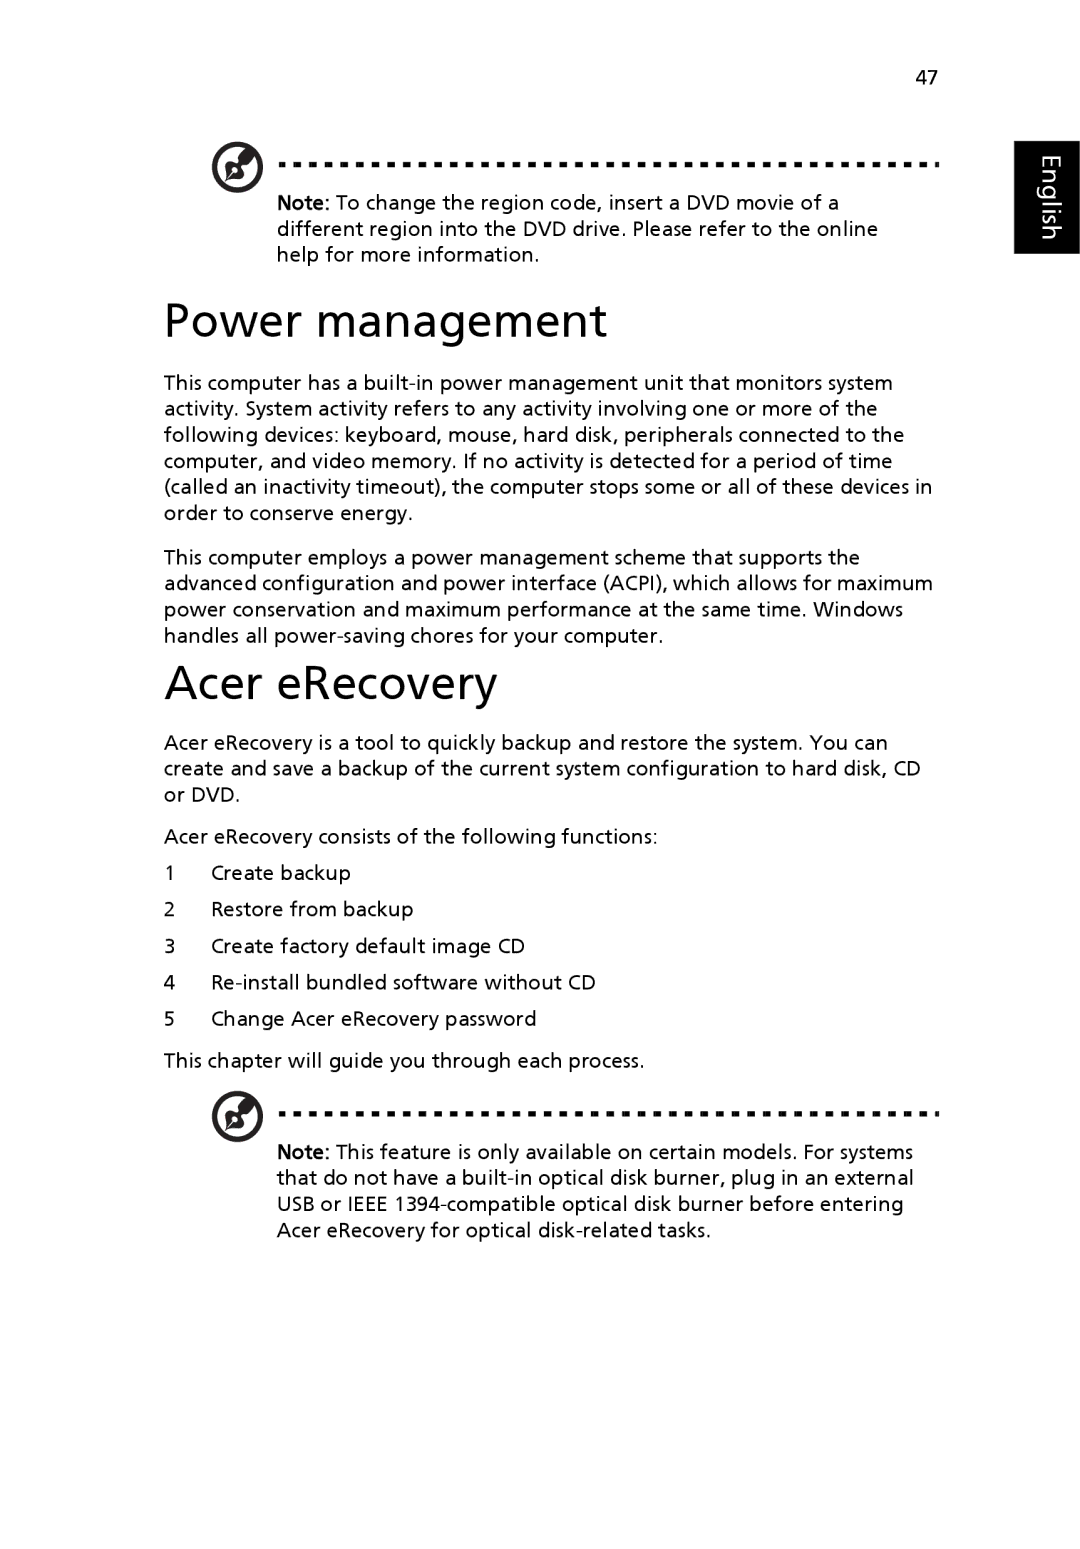 Acer 3610 Series manual Power management, Acer eRecovery 